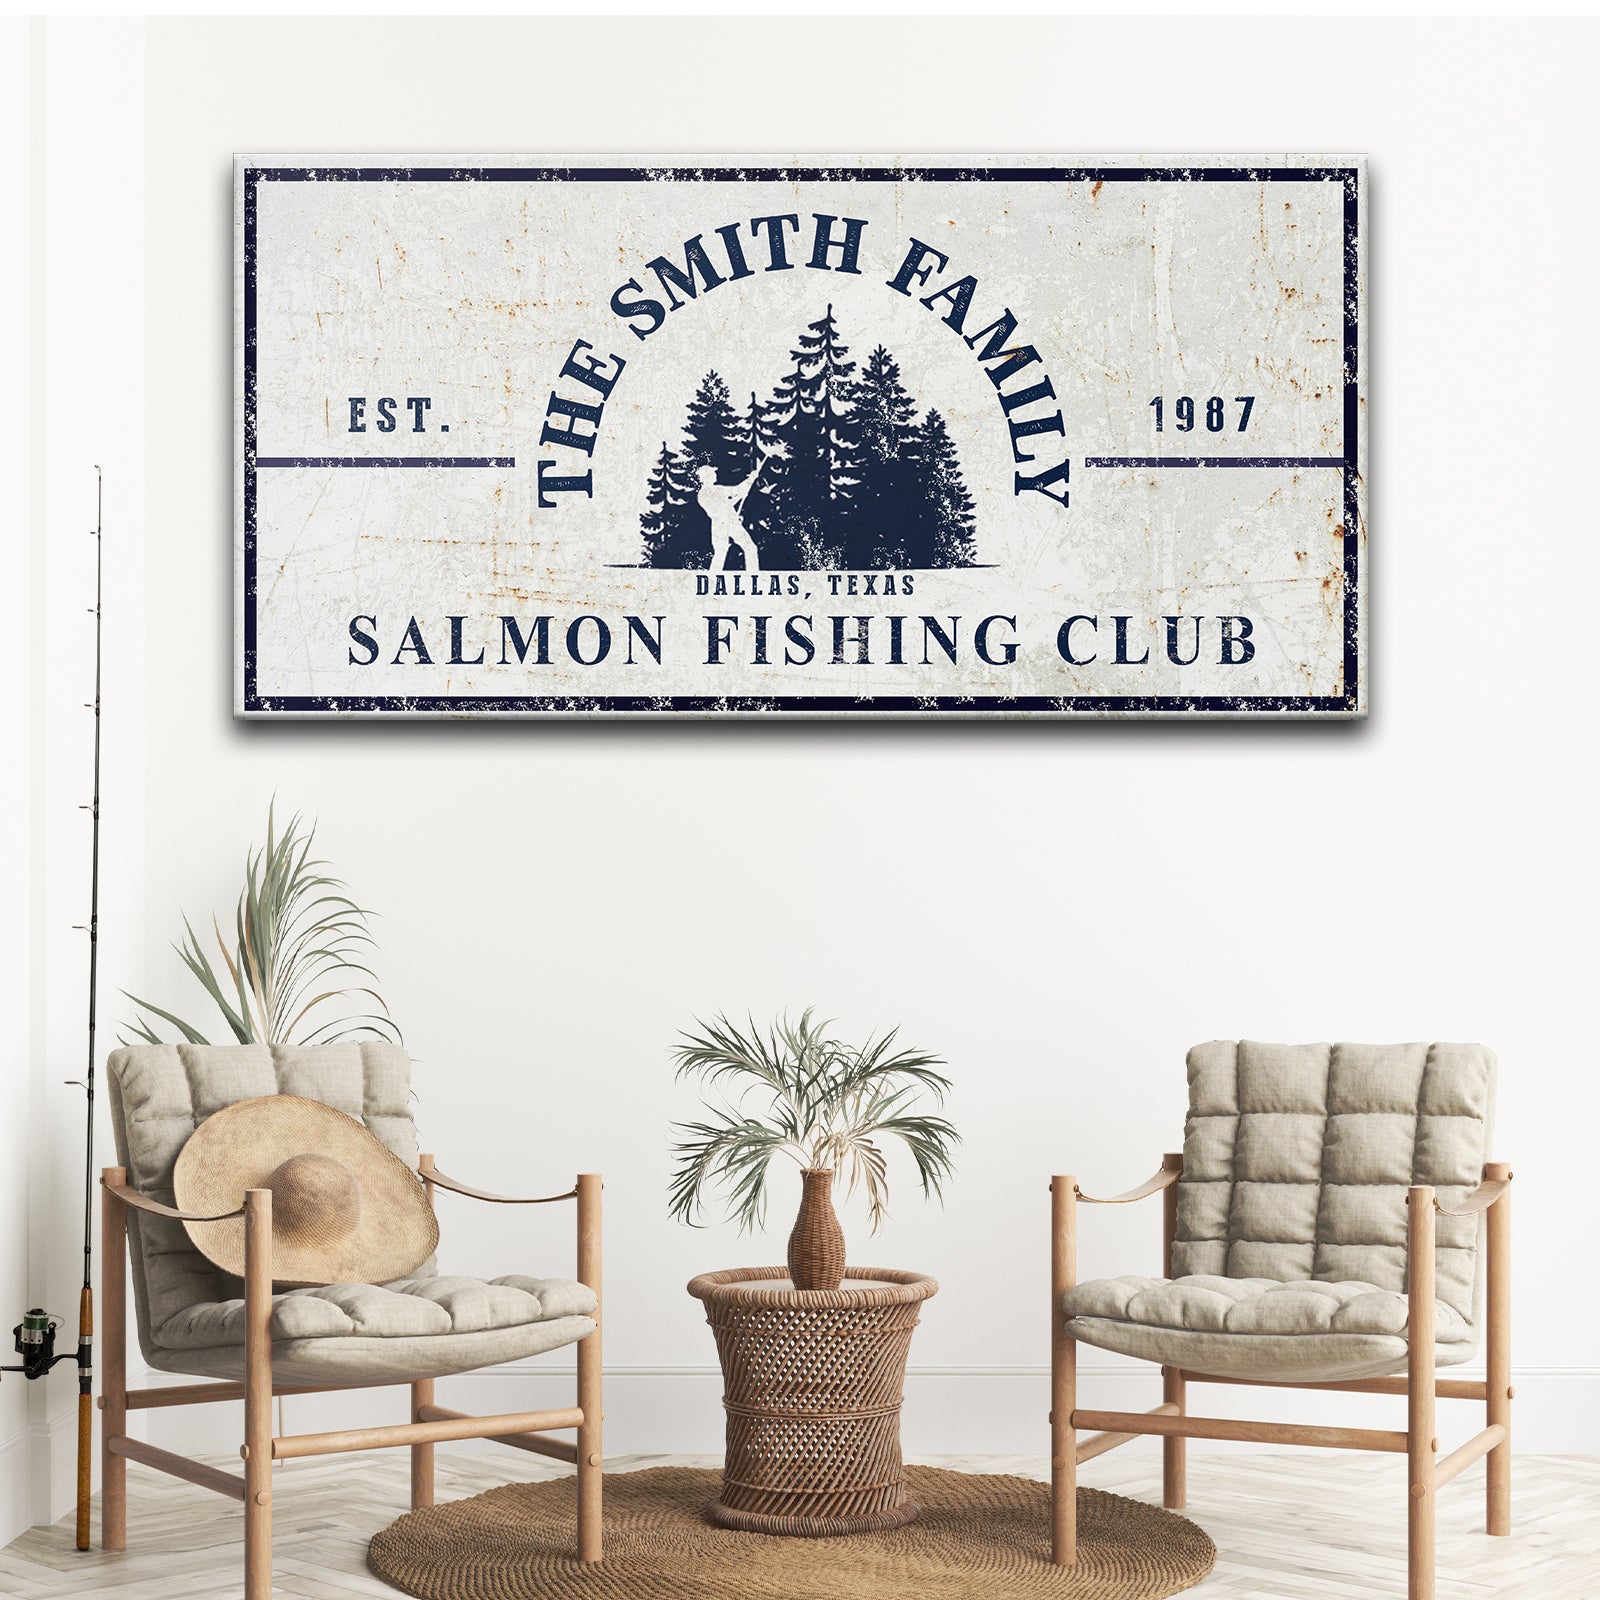 Fishing Club Sign - Image by Tailored Canvases